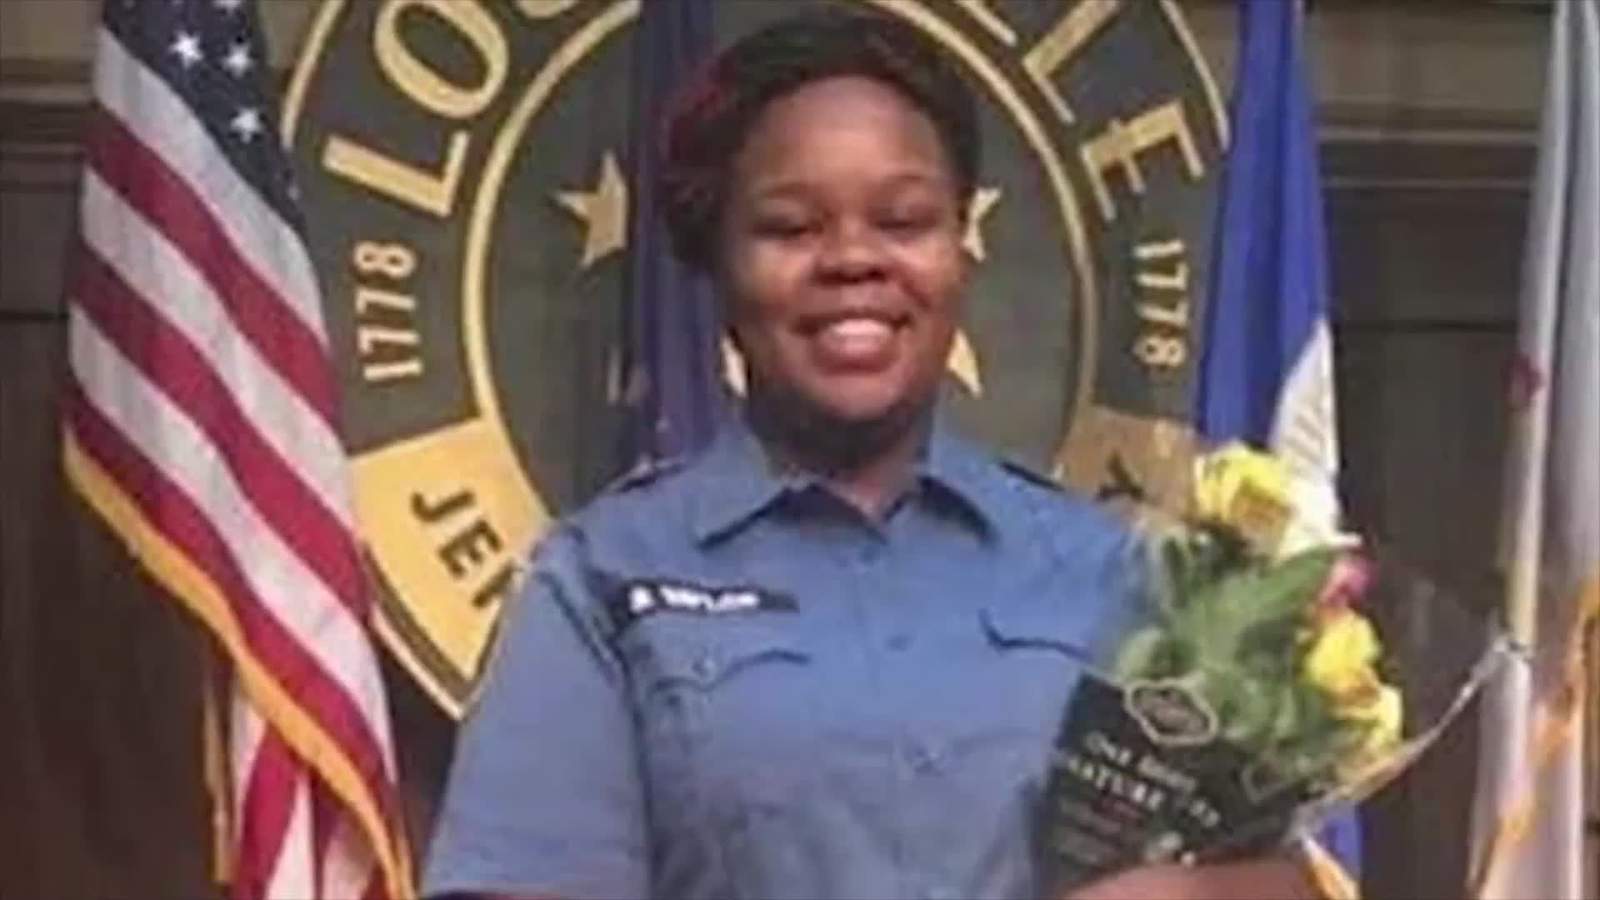 Breonna Taylor police report gives few details, some wrong